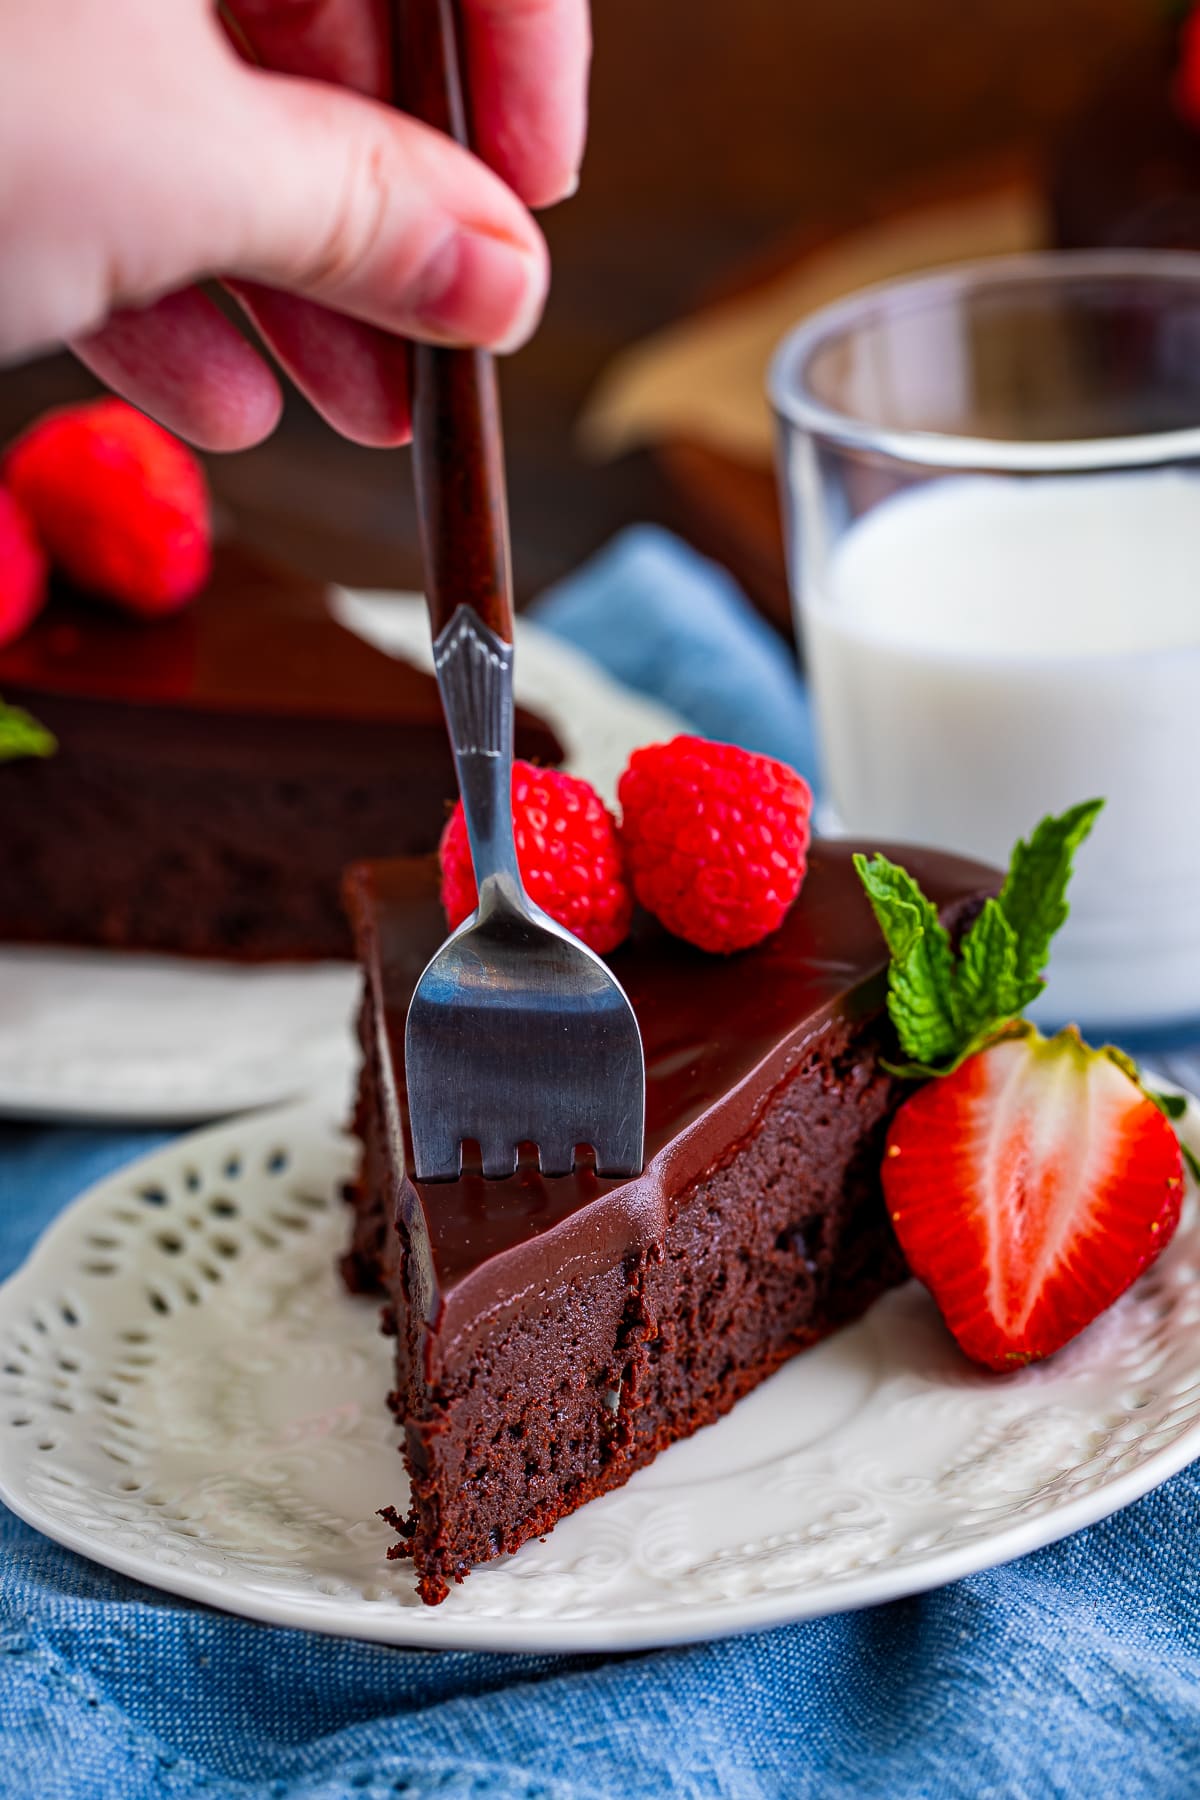 a fork taking a bite out of a slice of flourless chocolate cake recipe on a ivory plate